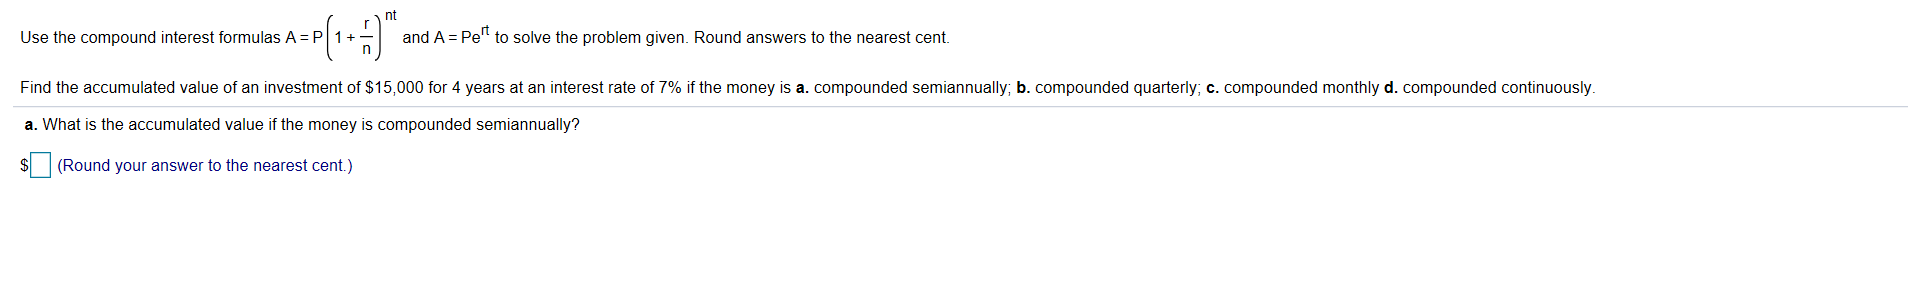 nt
Use the compound interest formulas A
P1 +_
and A Pe" to solve the problem given. Round answers to the nearest cent.
Find the accumulated value of an investment of $15,000 for 4 years at an interest rate of 7% if the money is a" compounded semiannually, b. compounded quarterly, c. compounded monthly d. compounded continuously
a. What is the accumulated value if the money is compounded semiannually?
S(Round your answer to the nearest cent.)
